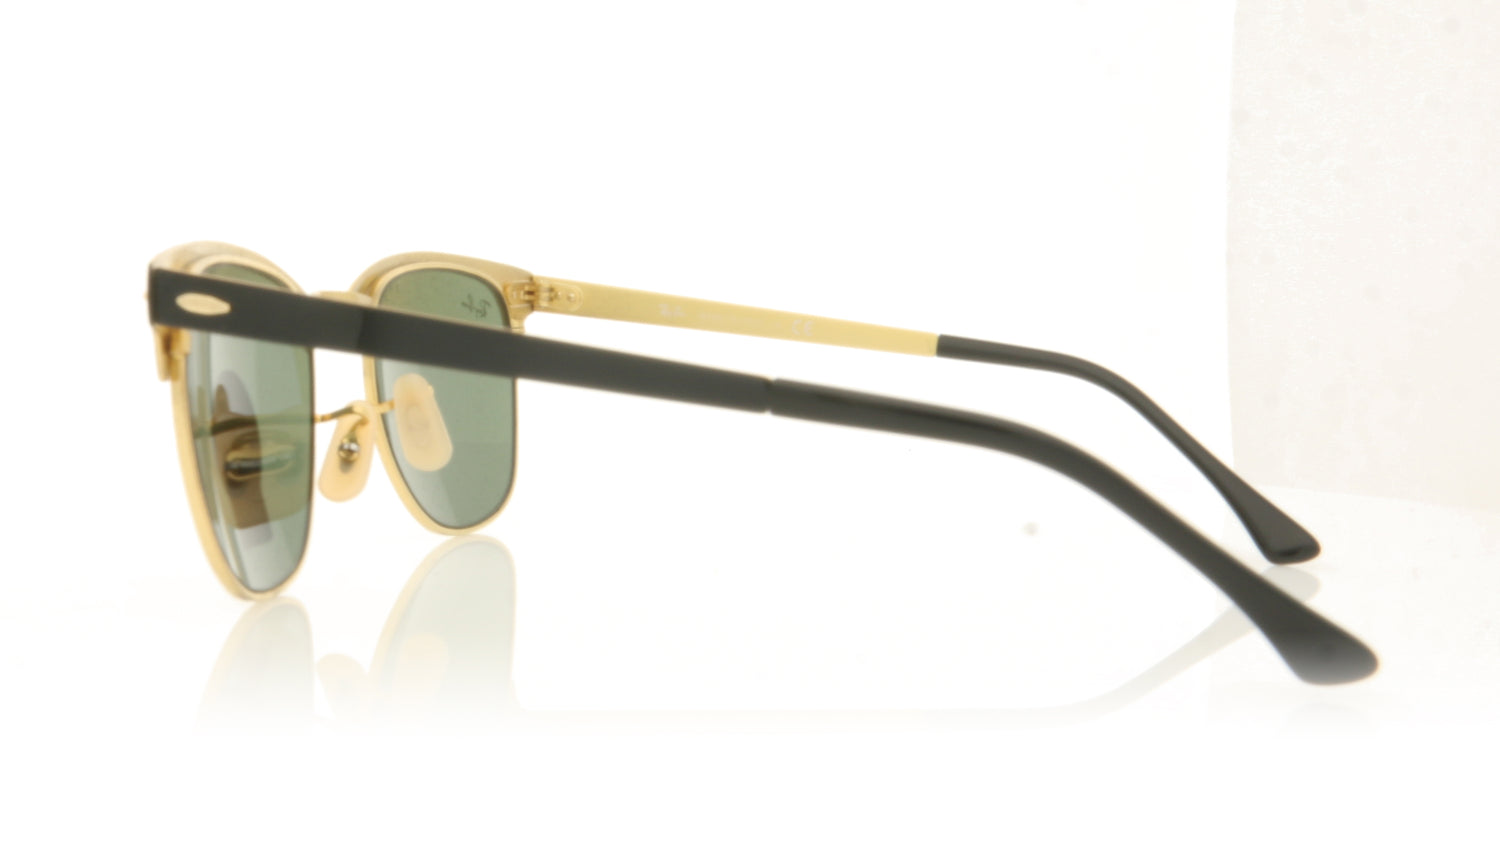 Ray-Ban Clubmaster Metal 187 Gold Top On Black Sunglasses - Side